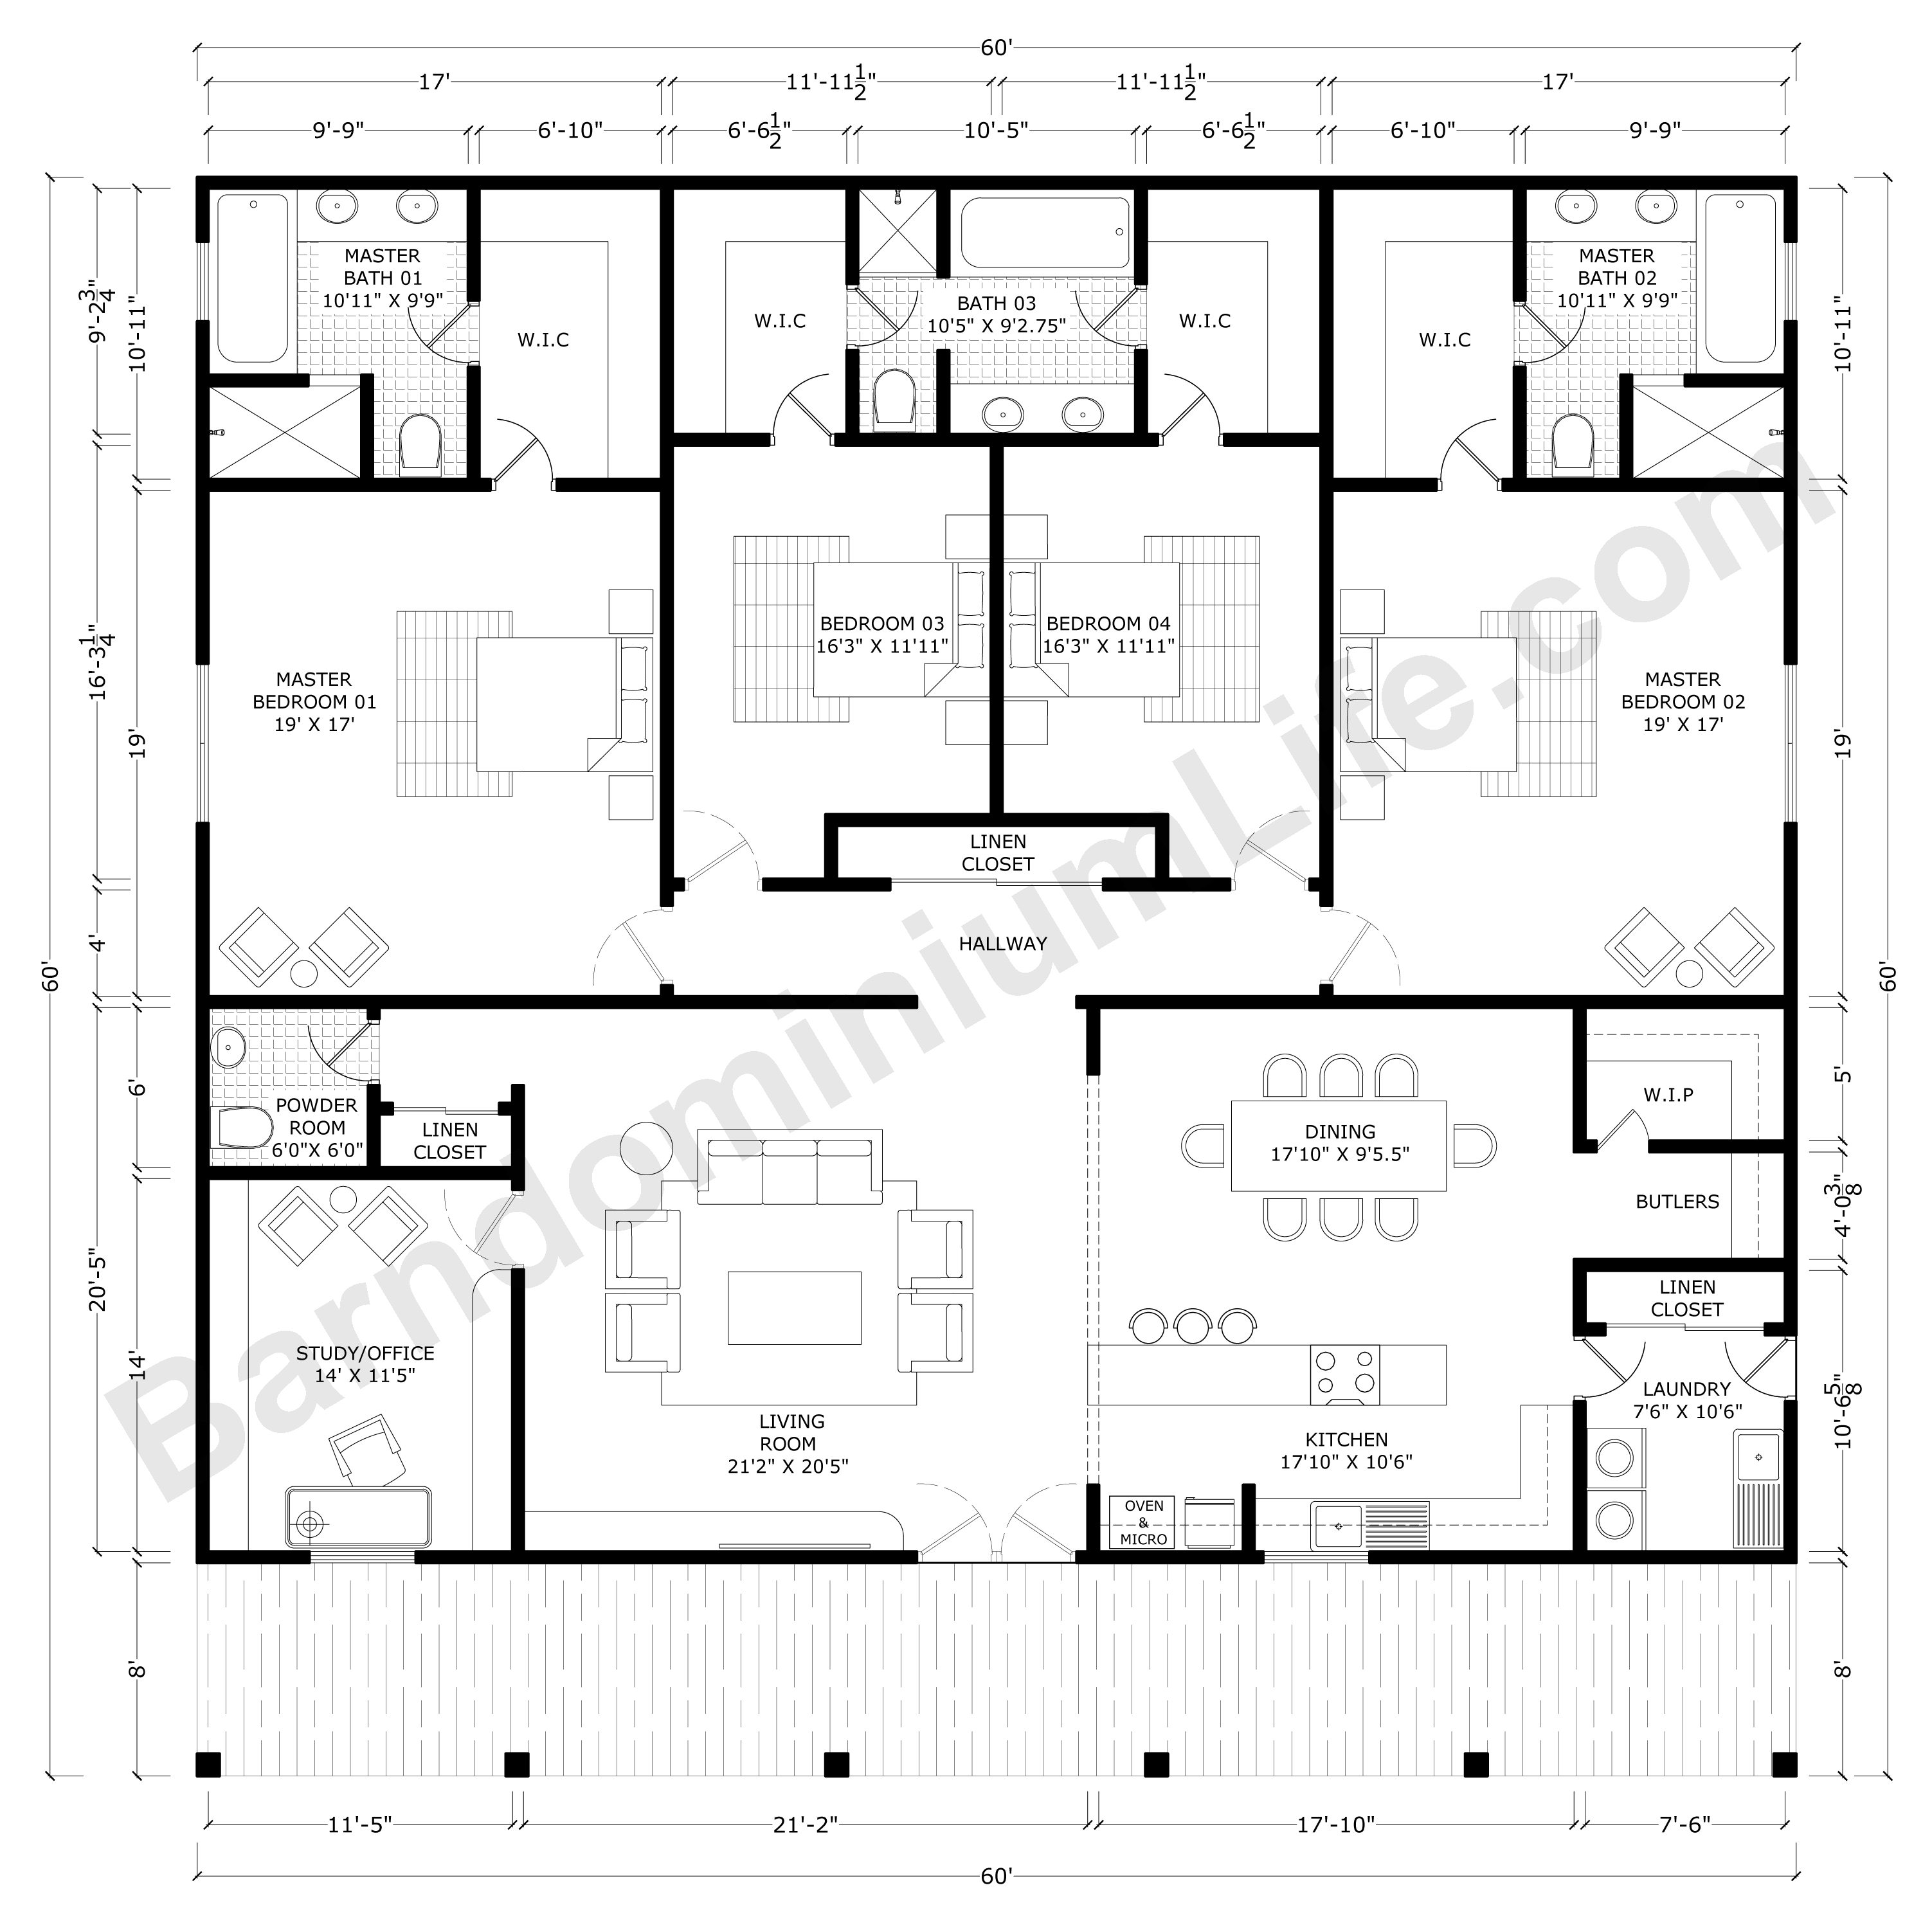 Design your own Barndominium Floor Plans with 2 Master Suites. about Barndo...